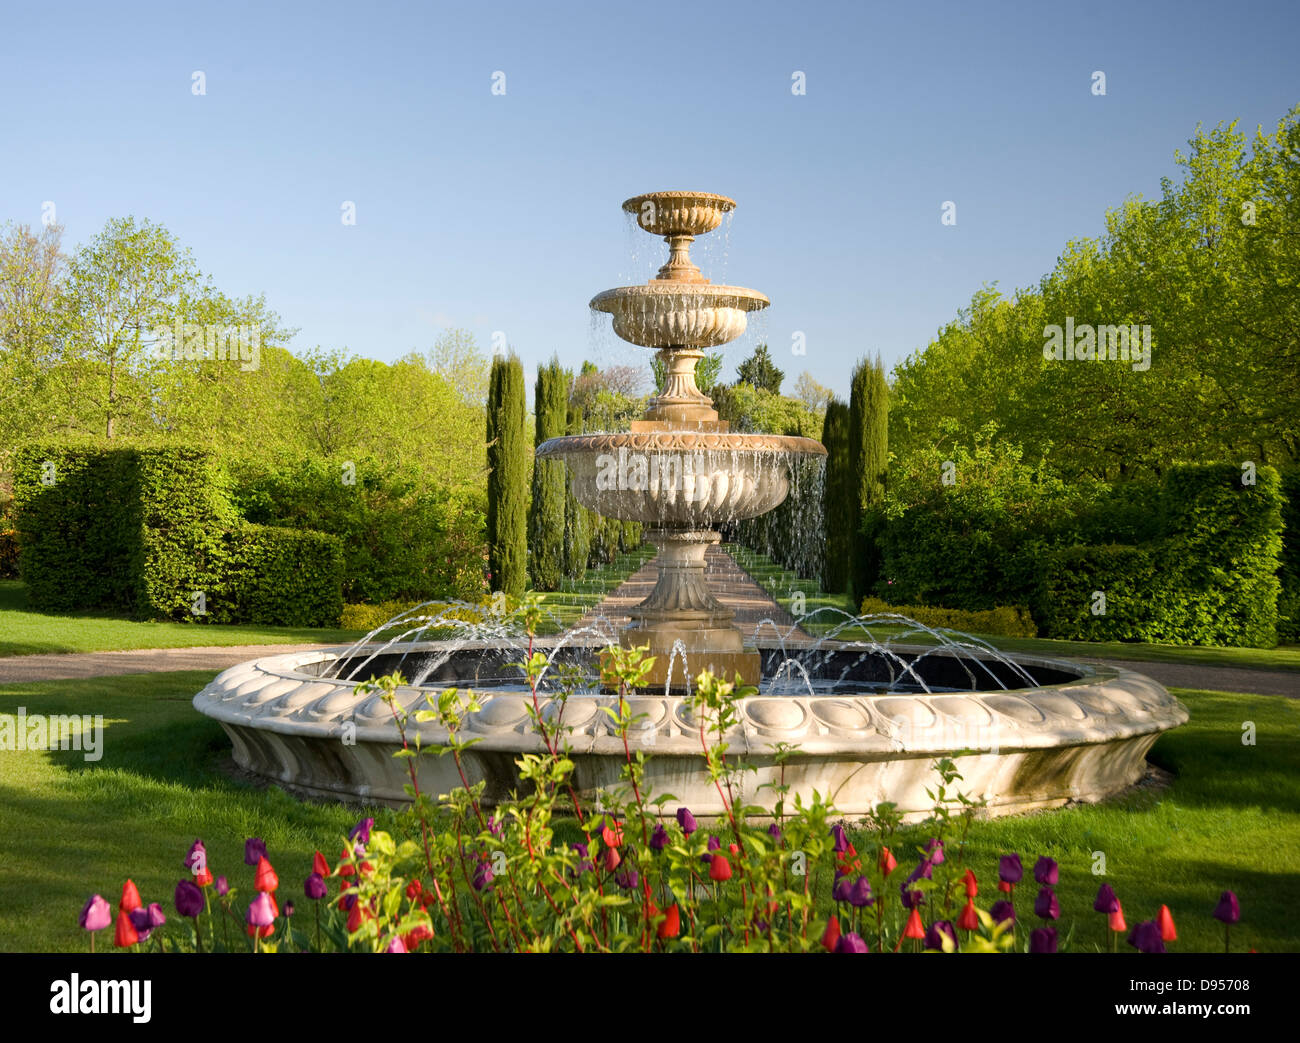 Multi coloured tulips planted around a stone fountain in Regent's Park, London, UK Stock Photo